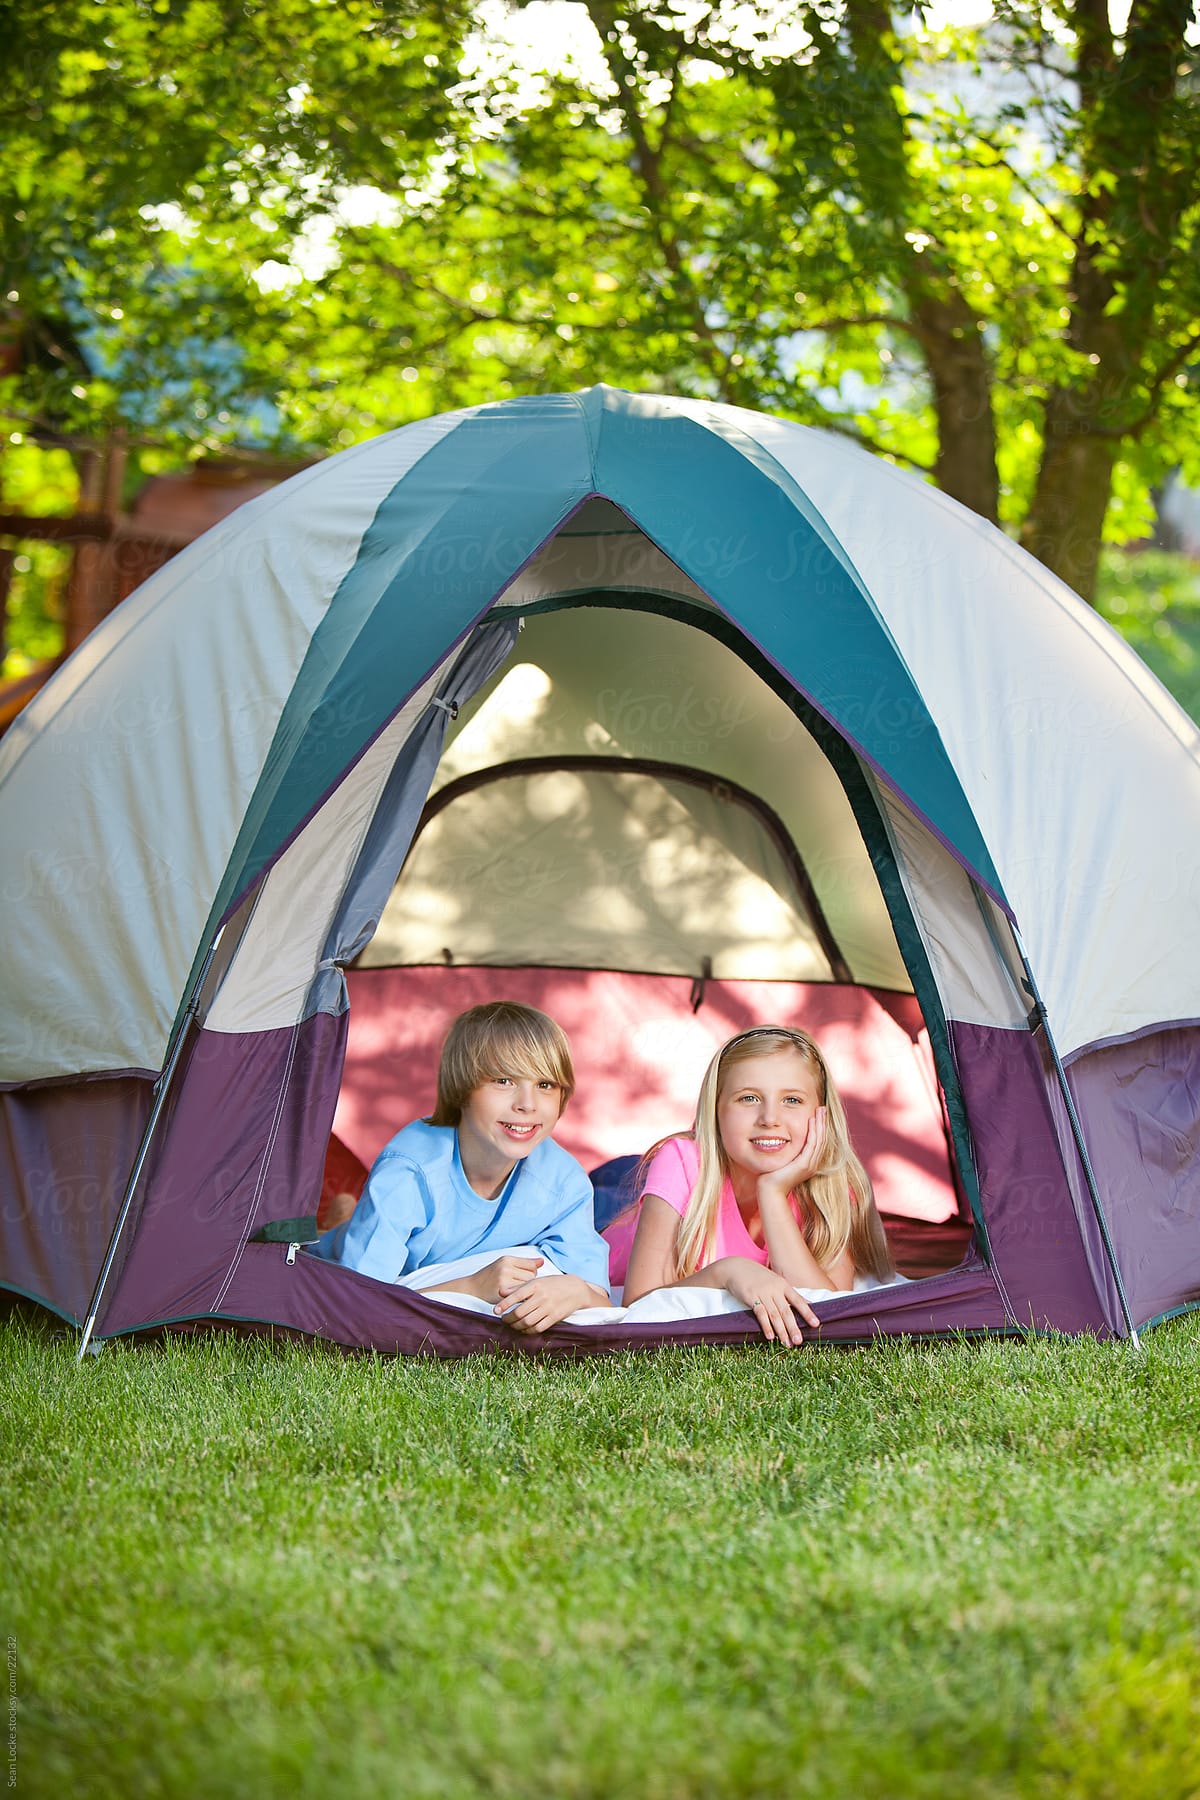 Camping: Two Kids in Backyard Tent